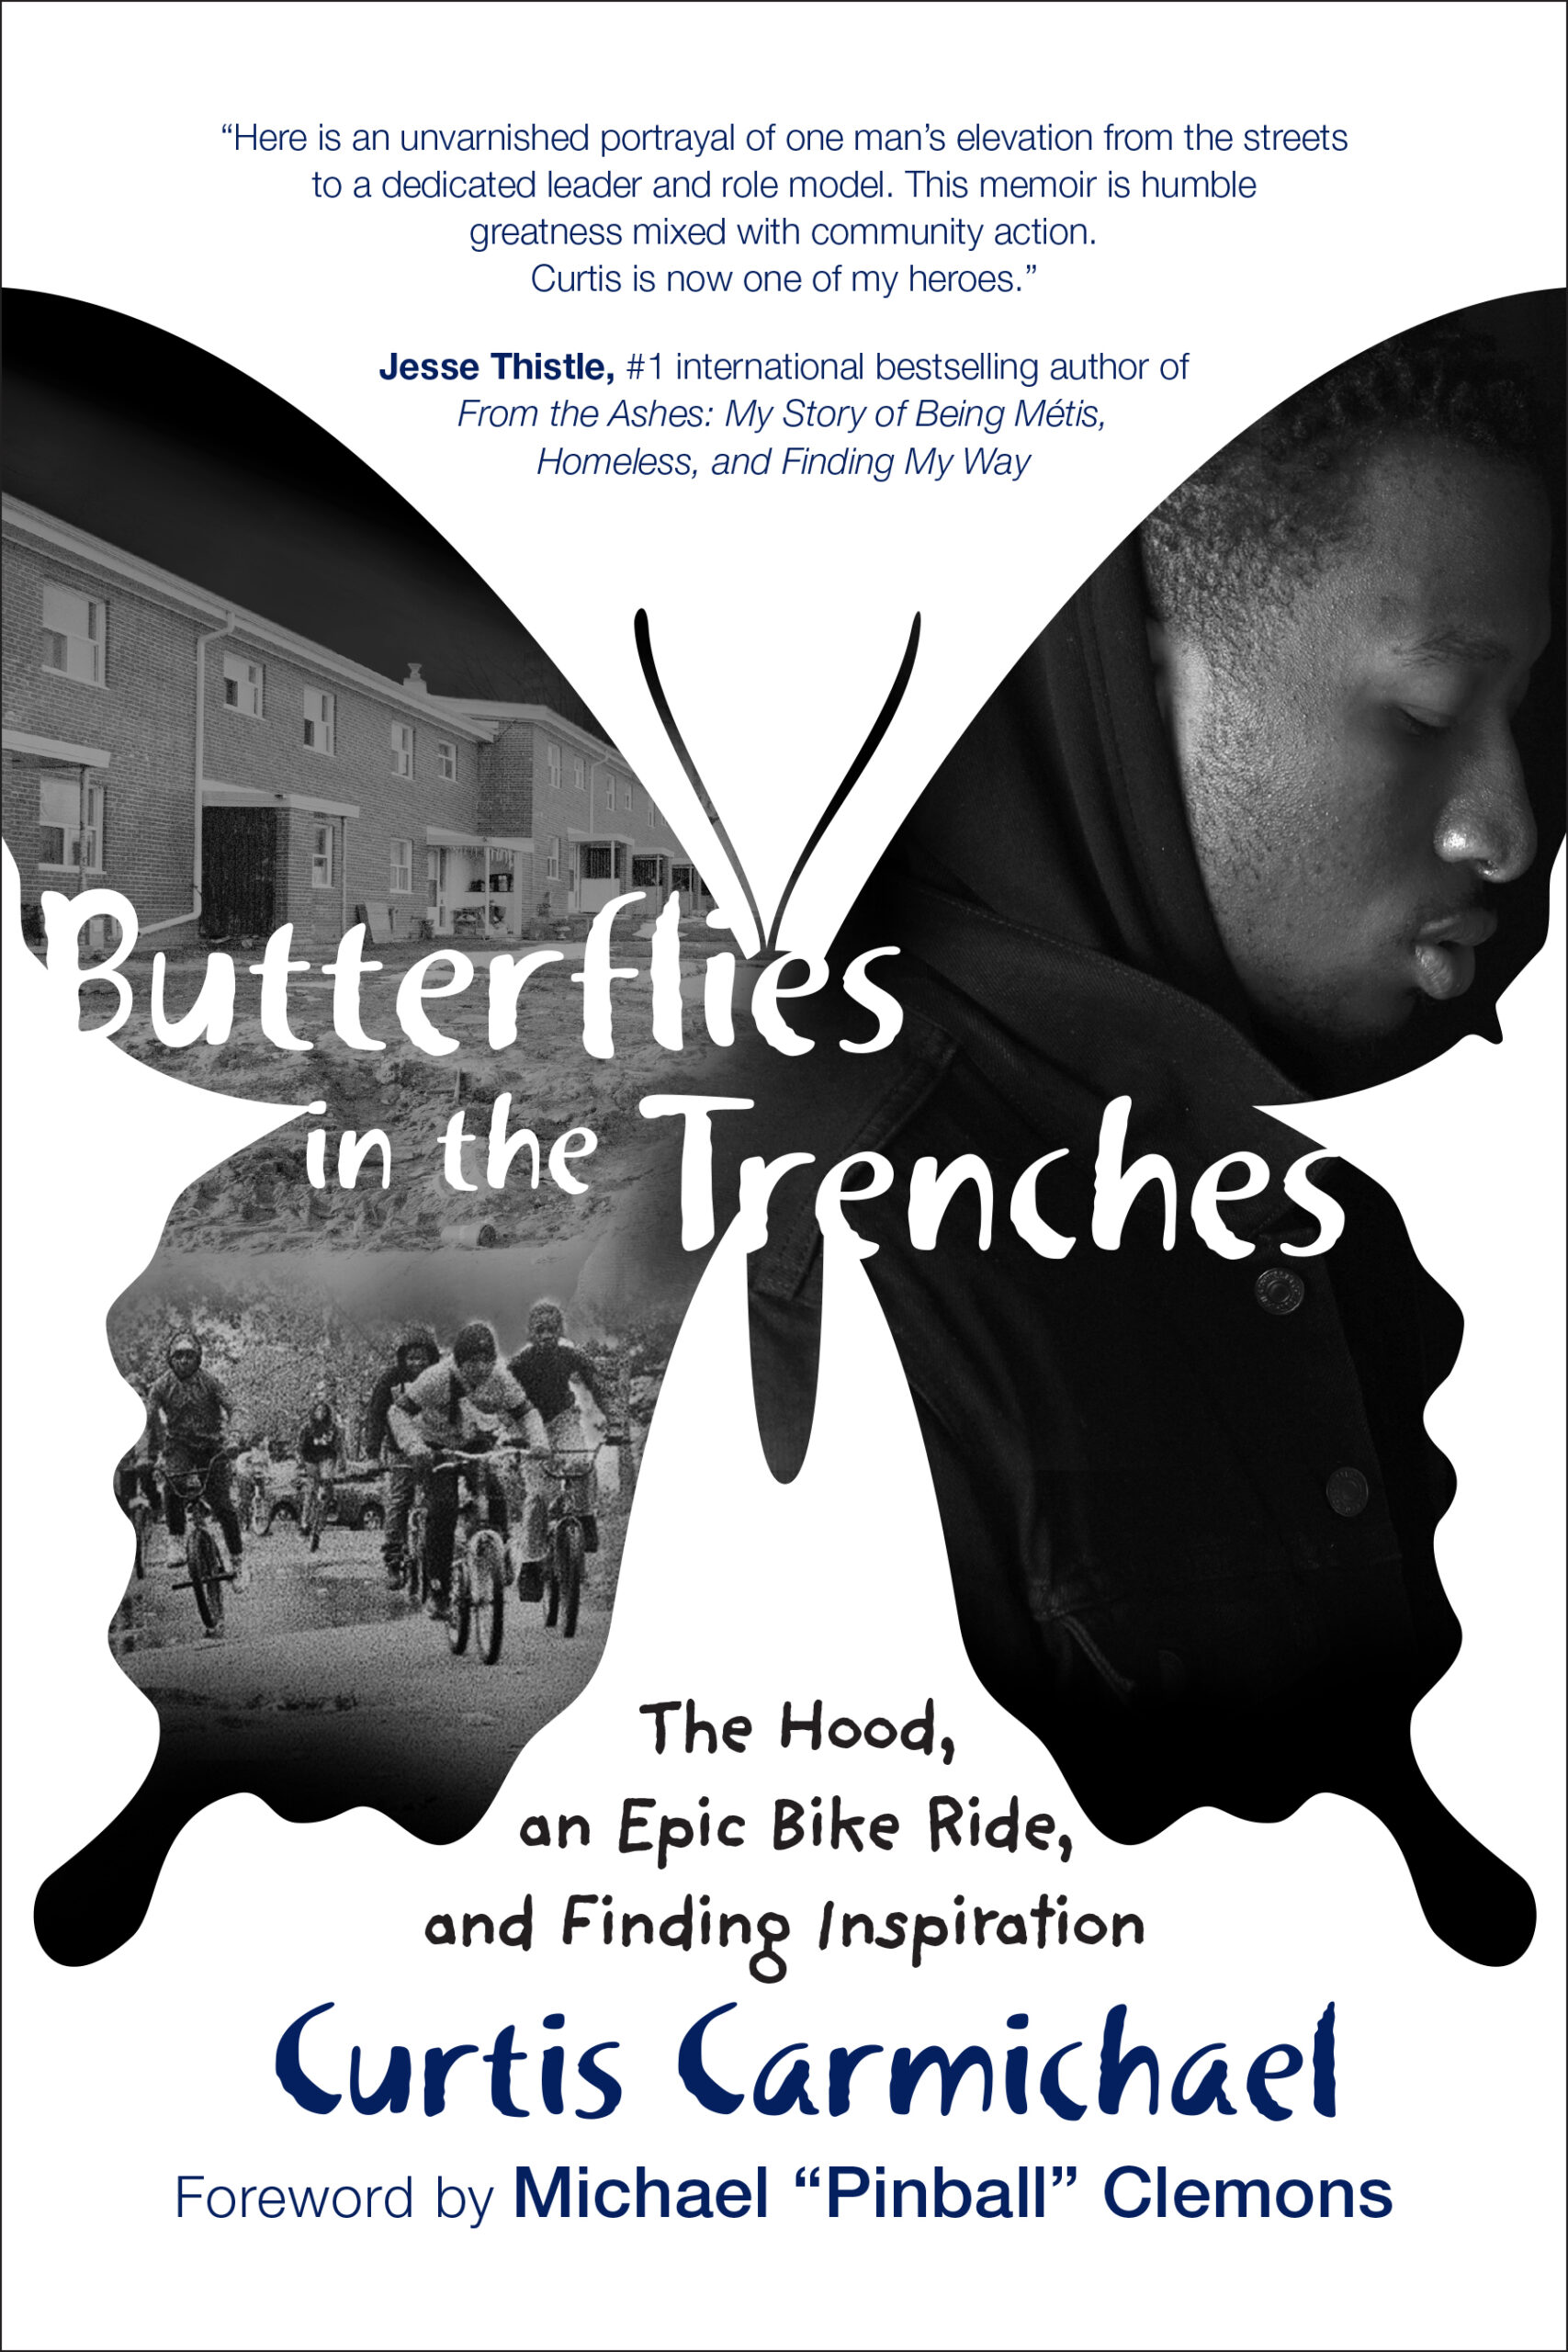 Cover for Butterflies in the Trenches by Curtis Carmichael. Image of a butterfly filled with black and white photos with the subtitle 